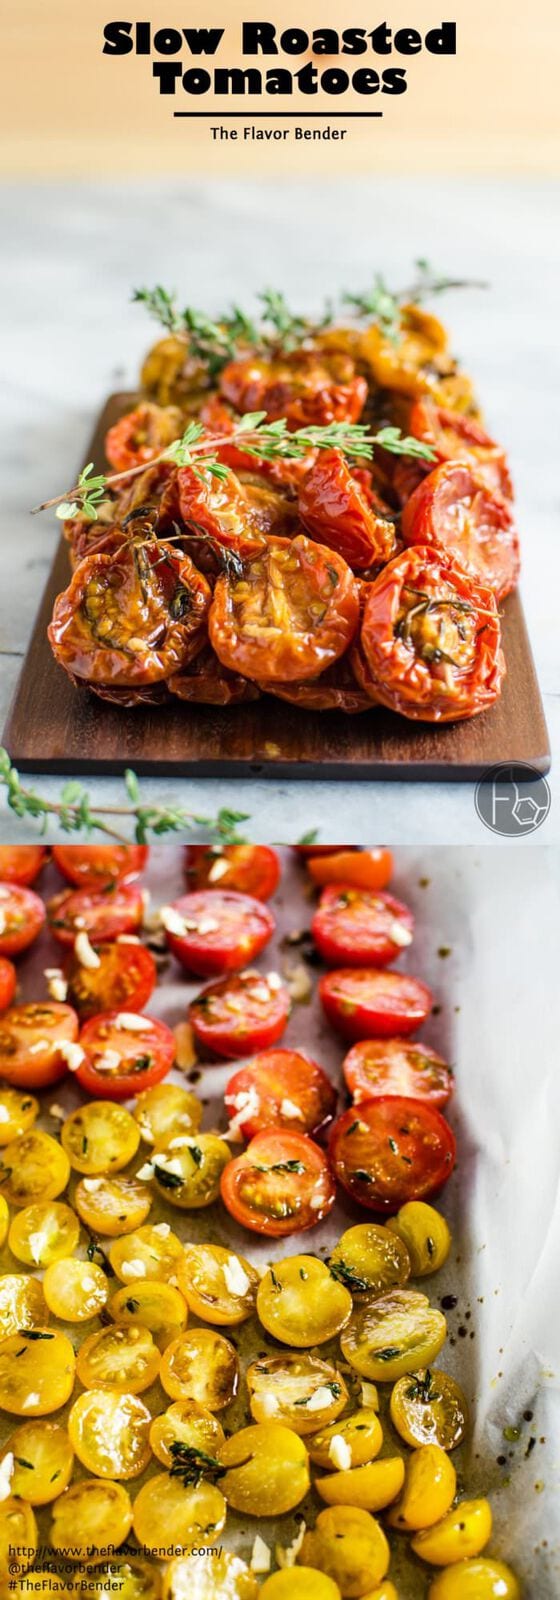 Juicy Slow Roasted Tomatoes - A simple way to make your tomatoes taste even better AND last longer! Different flavor combos for different tastes and so many uses!